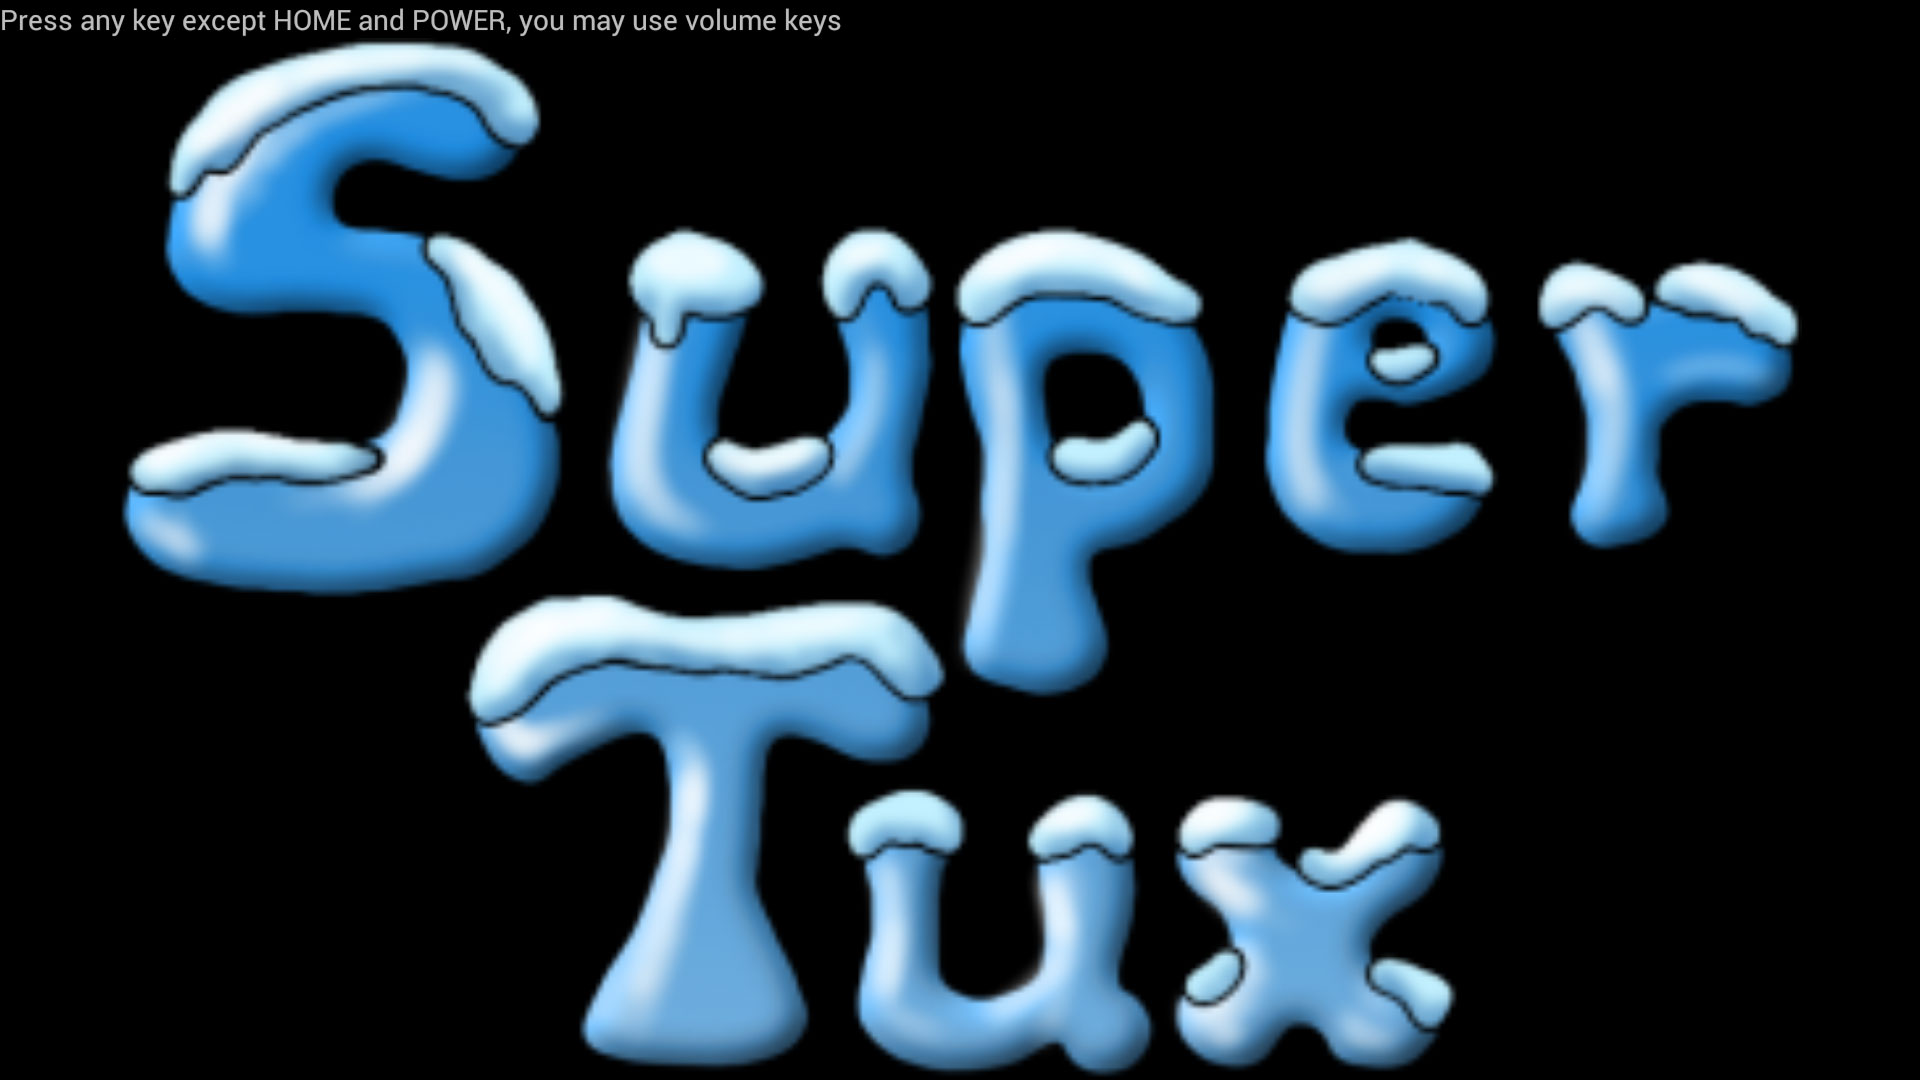 SuperTux for Ouya Remap Physical Key - Press any key